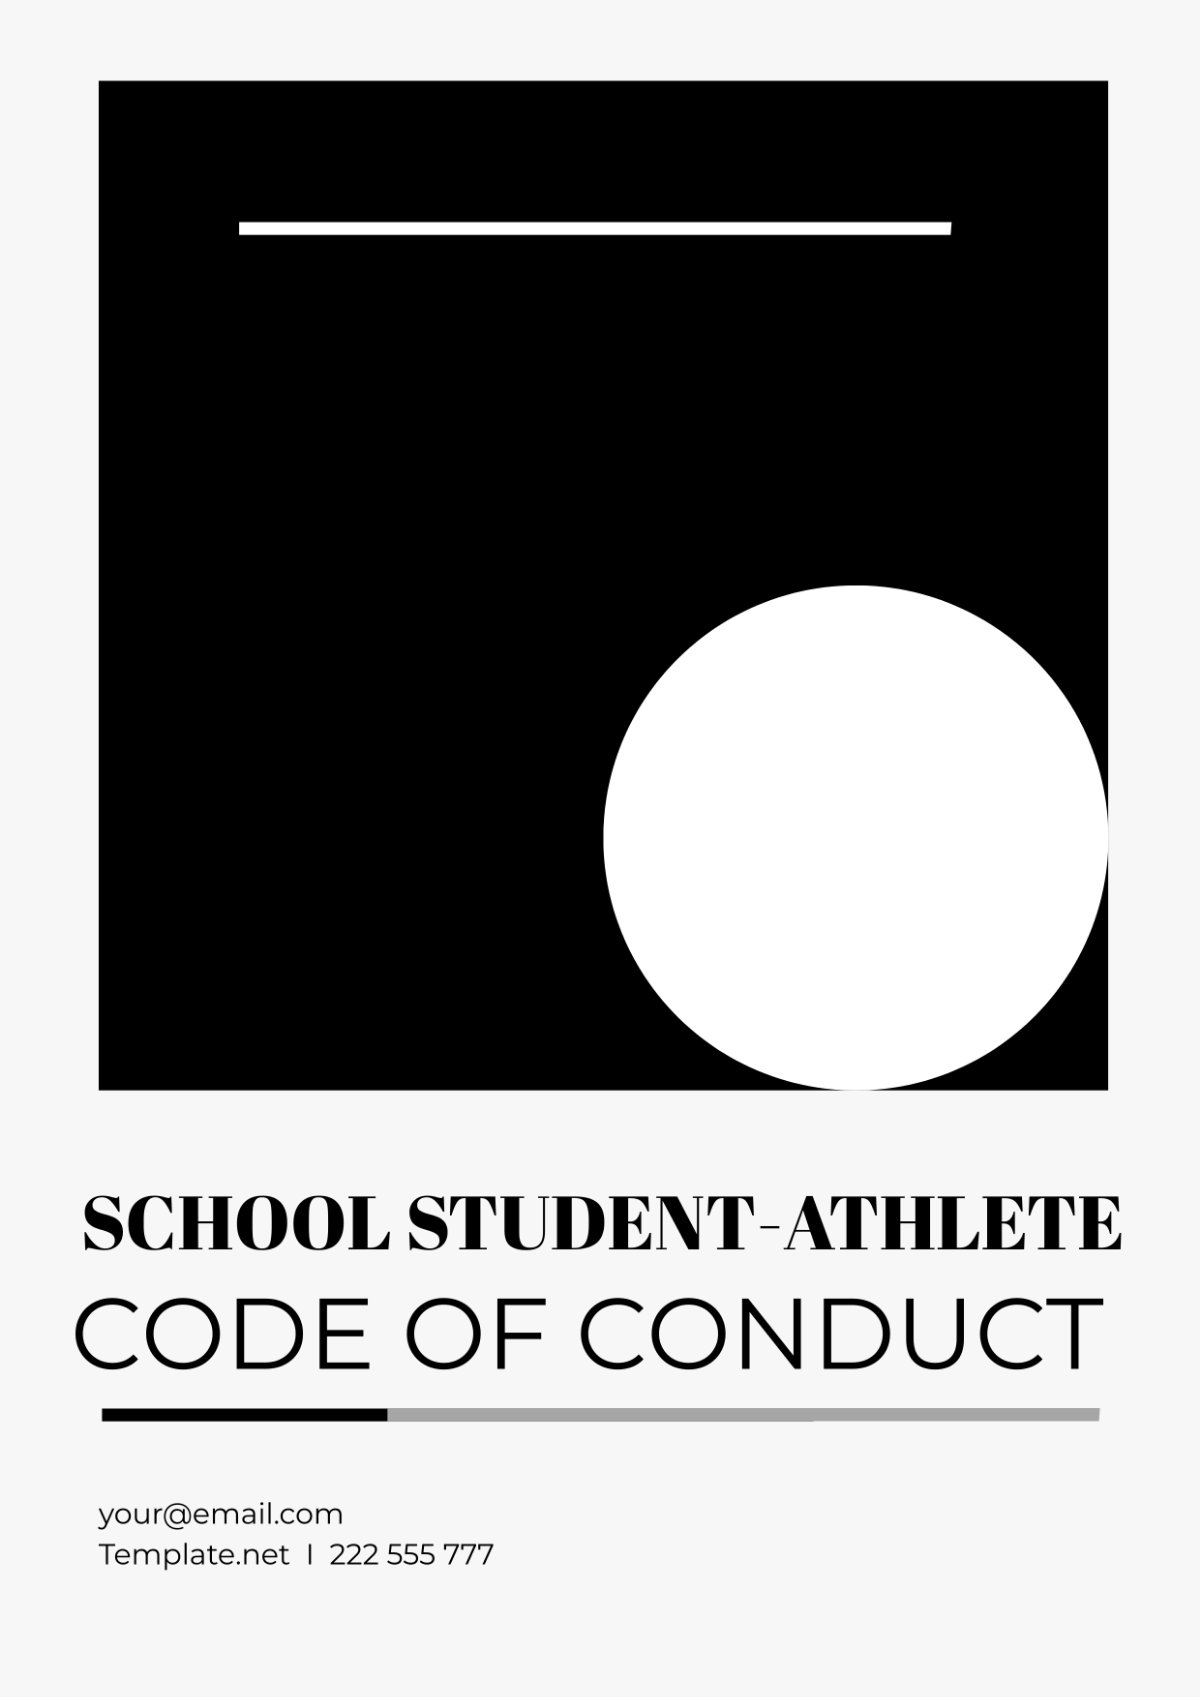 Free School Student-Athlete Code of Conduct Template